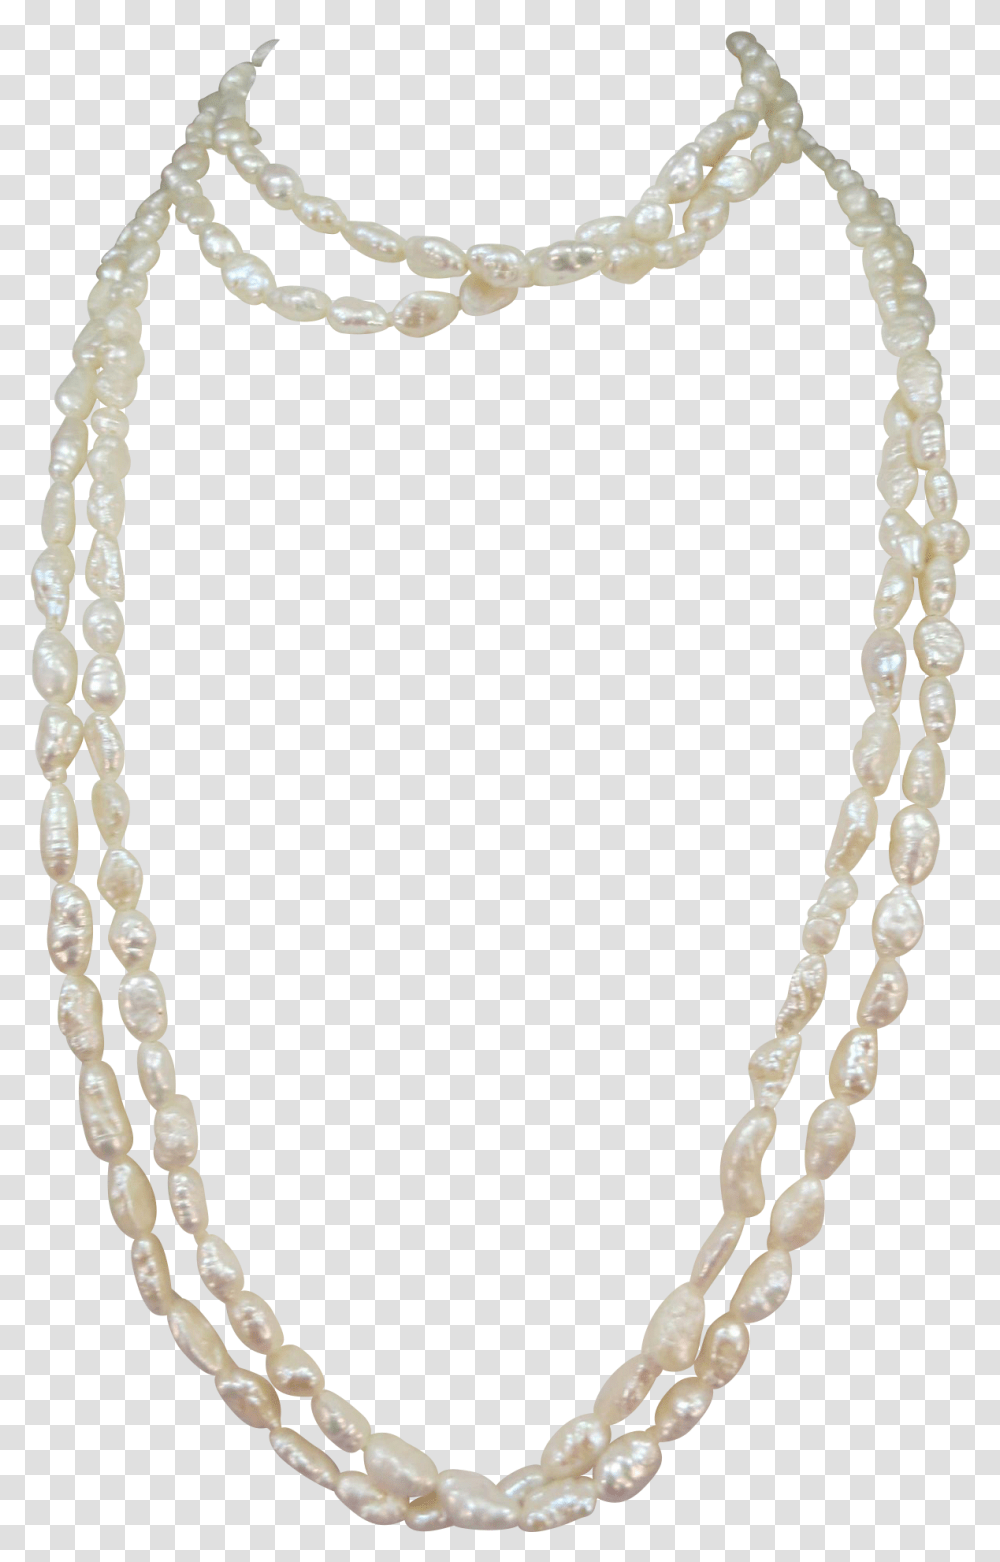 Vintage Fresh Water Pearls Necklace And Bracelet Necklace Necklace, Bead Necklace, Jewelry, Ornament, Accessories Transparent Png